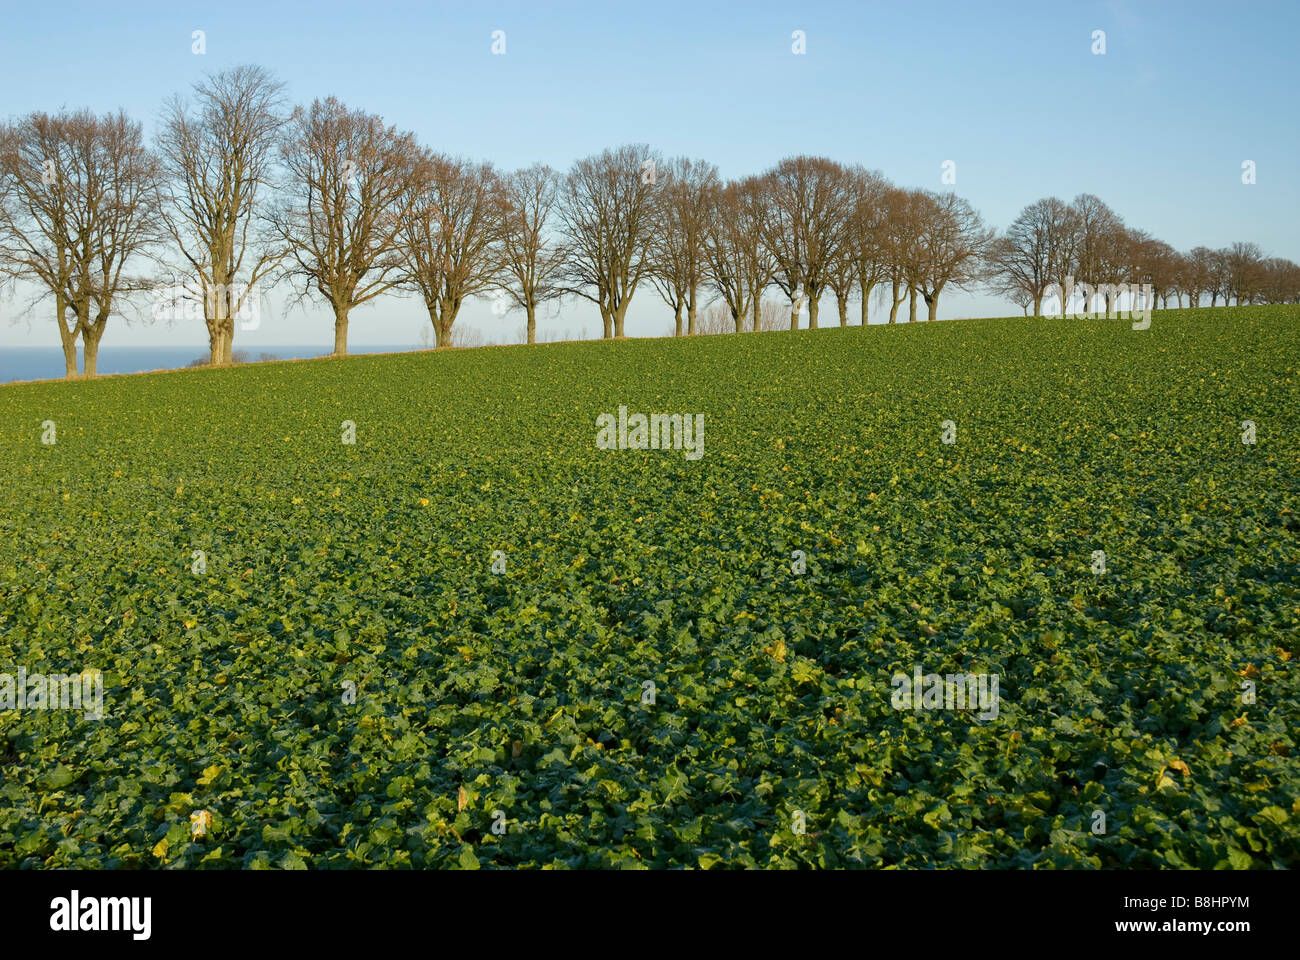 Avenue with farming field in front Stock Photo